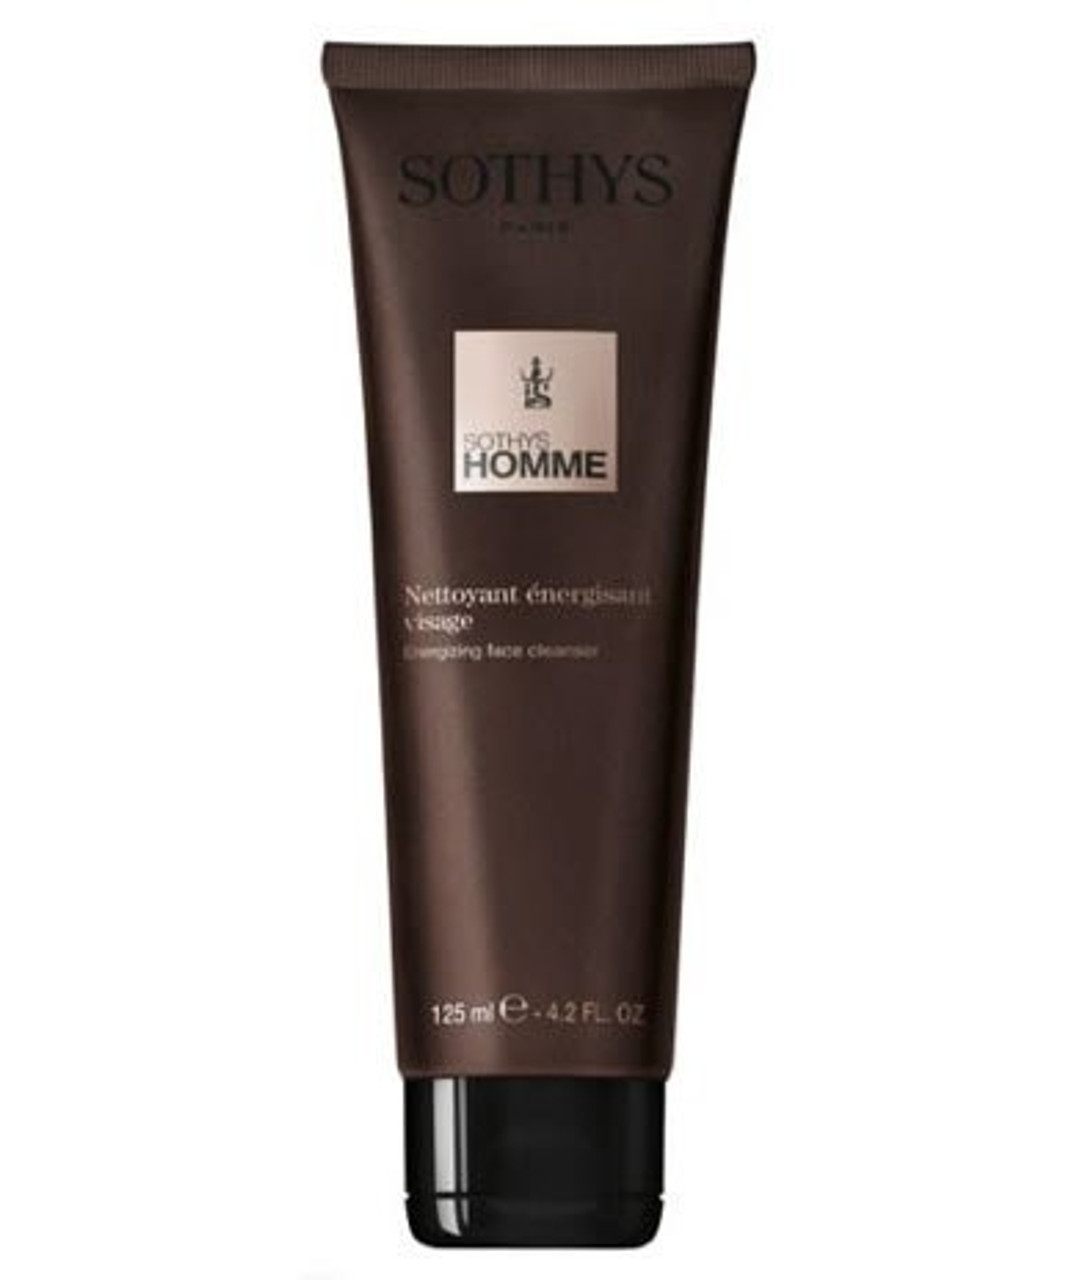 Sothys Homme Energizing Face Cleanser - 4.22 oz ® on Sale at $33 - Free ...